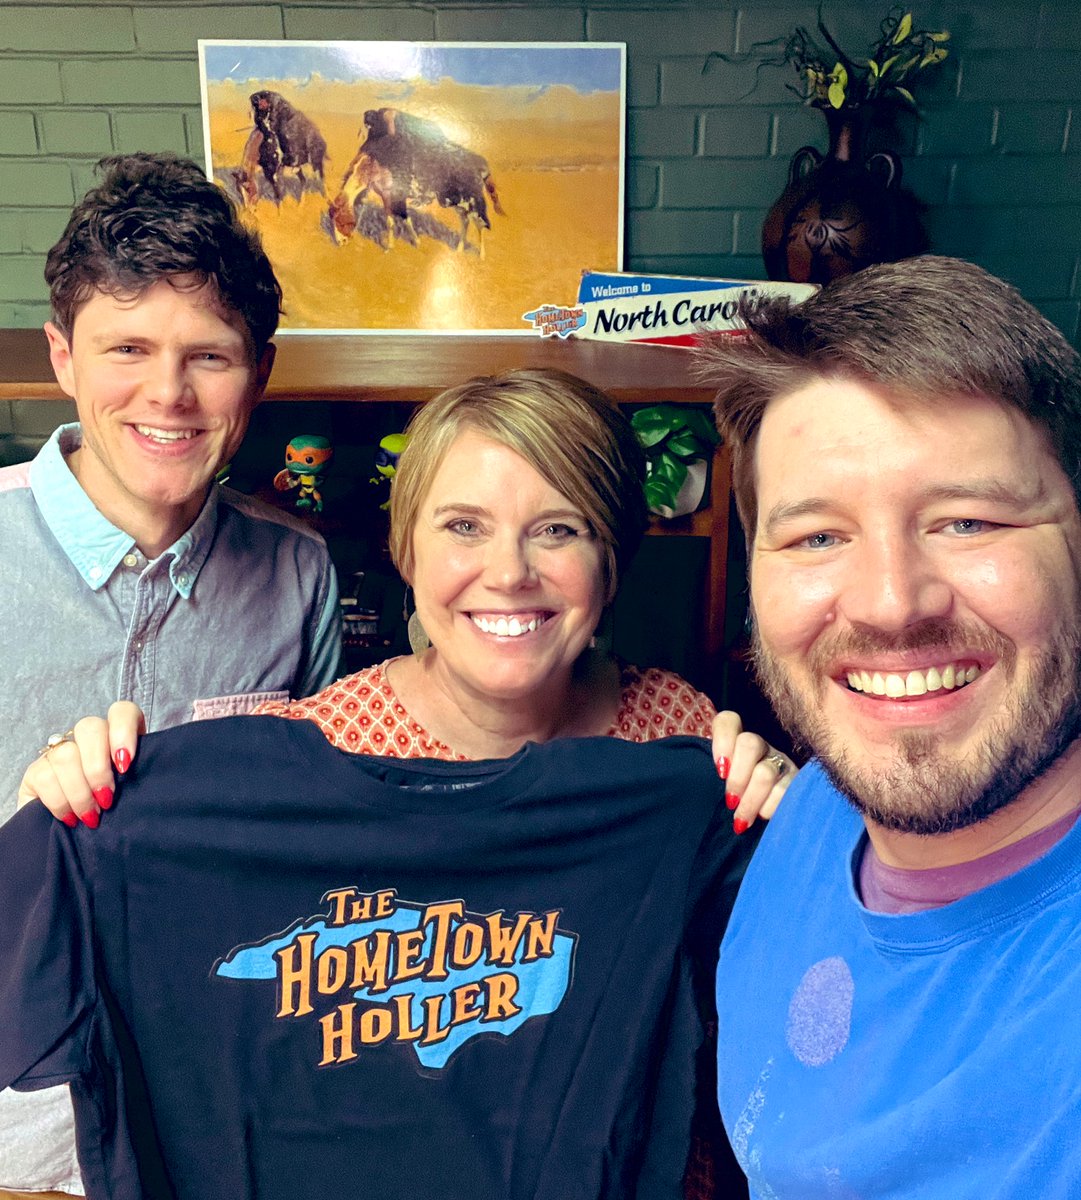 The guys from @hometown_holler and I had a great morning of conversation recording a new episode of their podcast! We shared some stories, a few laughs and they crowned me a certified badass- I’ll take it. 😉 Can’t wait to hear the episode! Thanks for having me on! 🙏